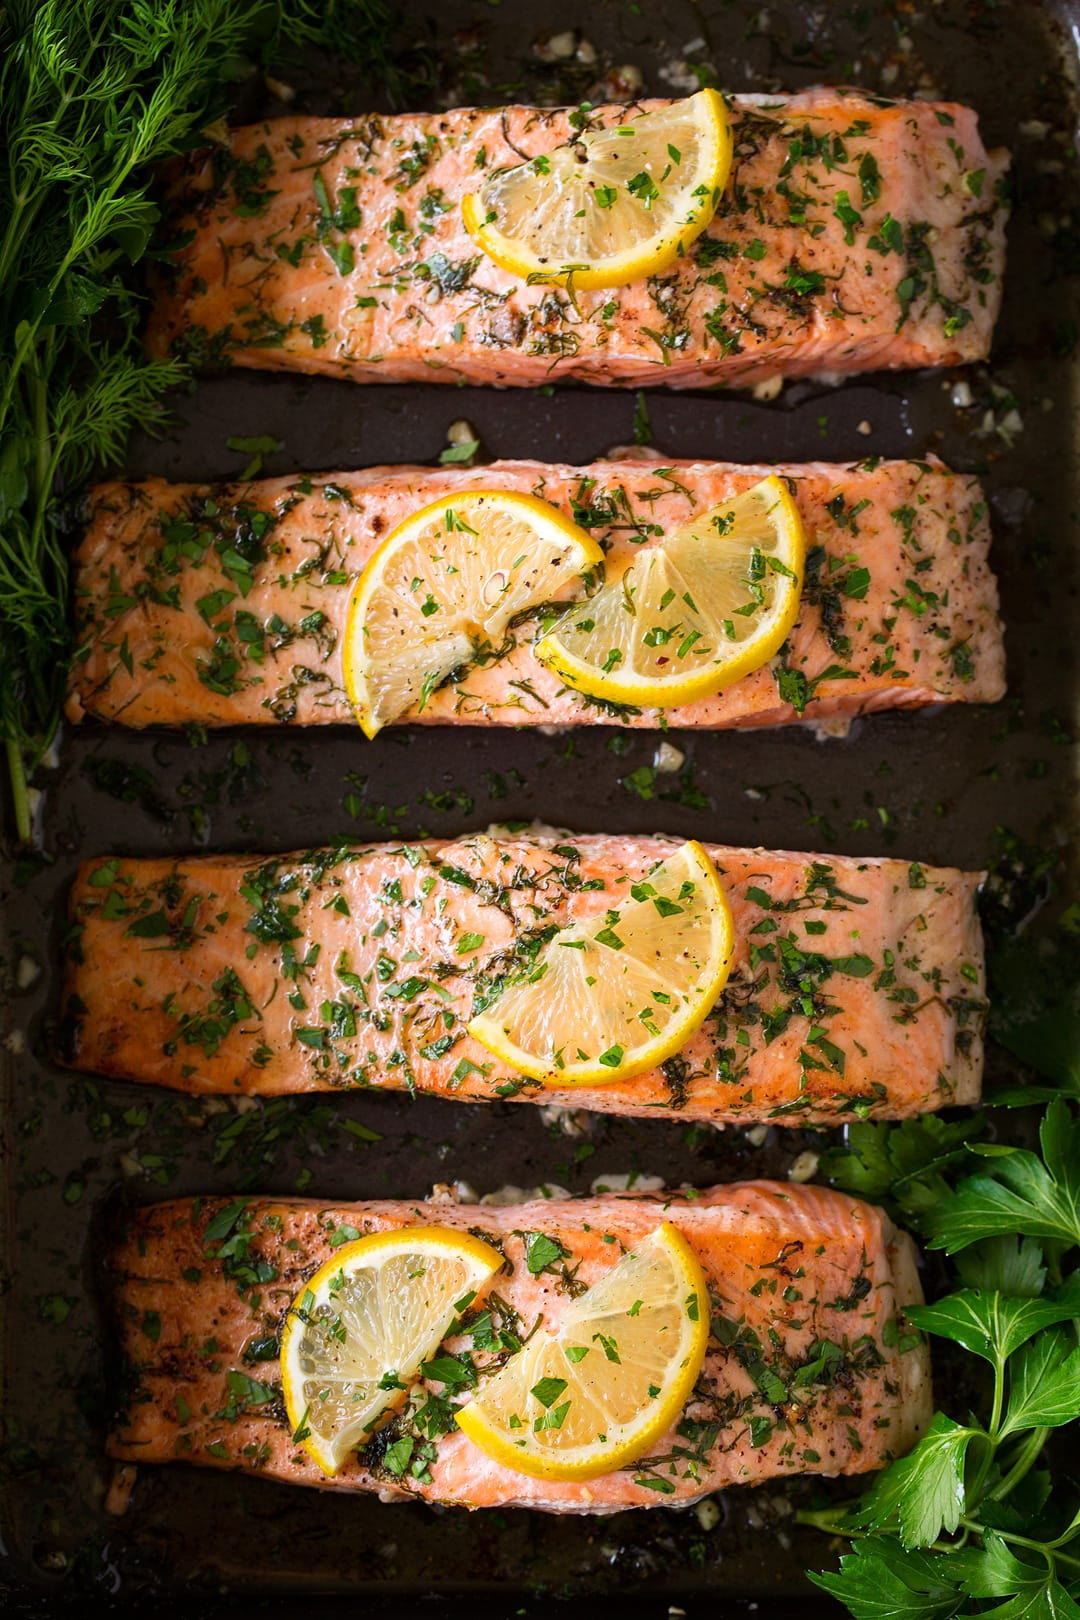 Salmon Roasted in Butter